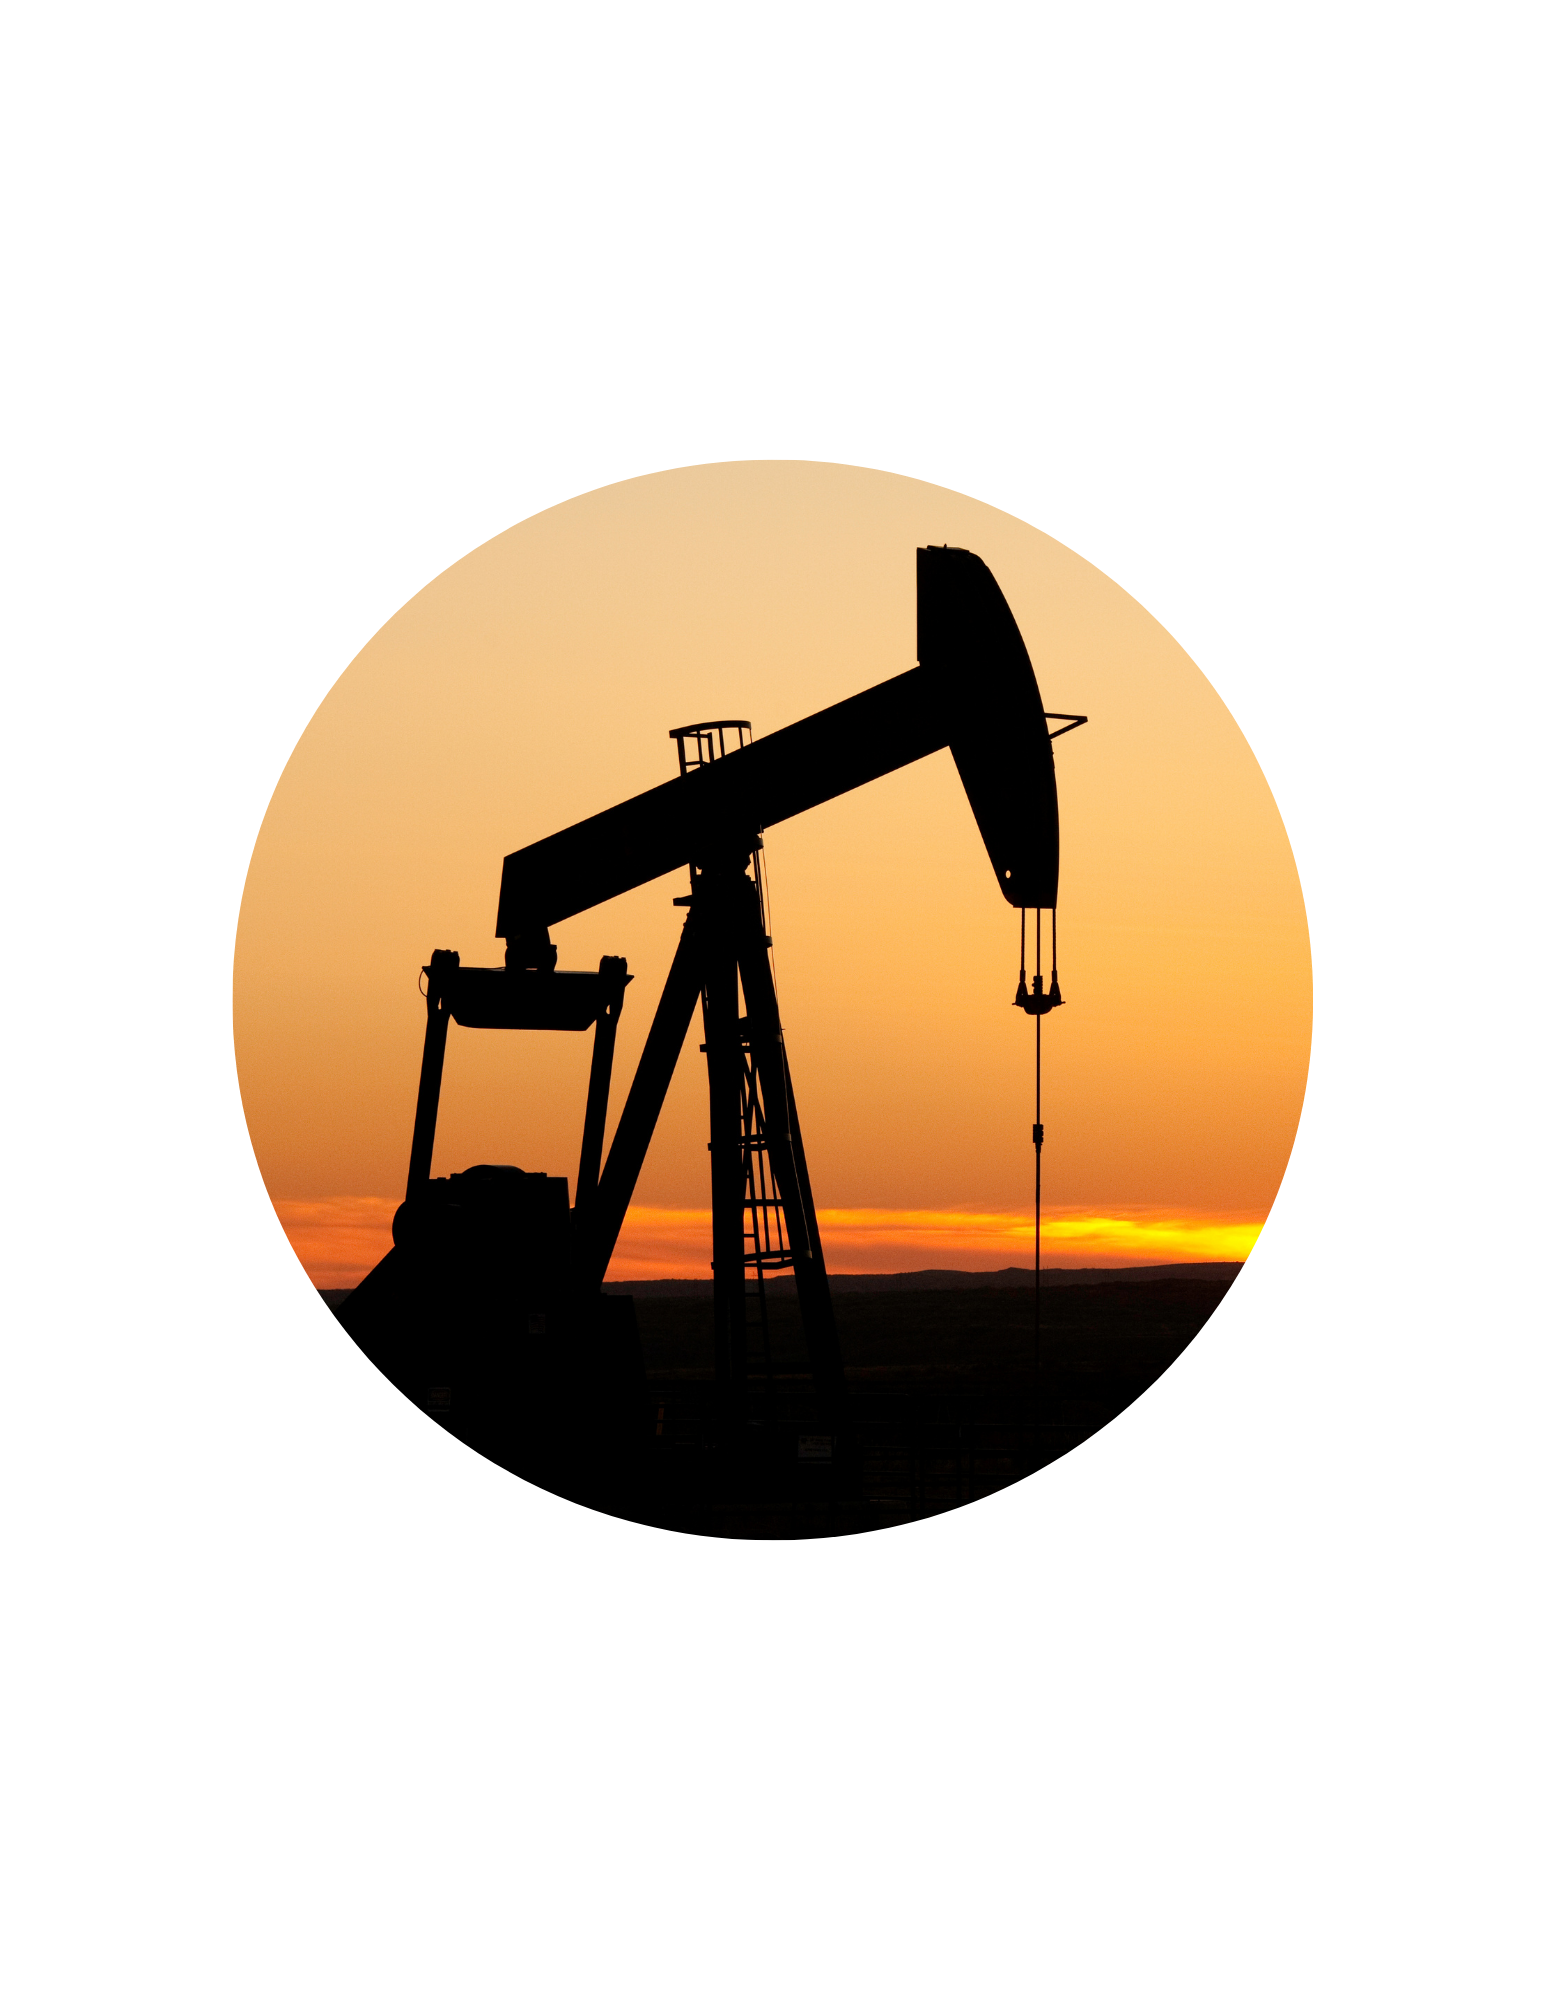 silhouette of oil pump against sunset sky